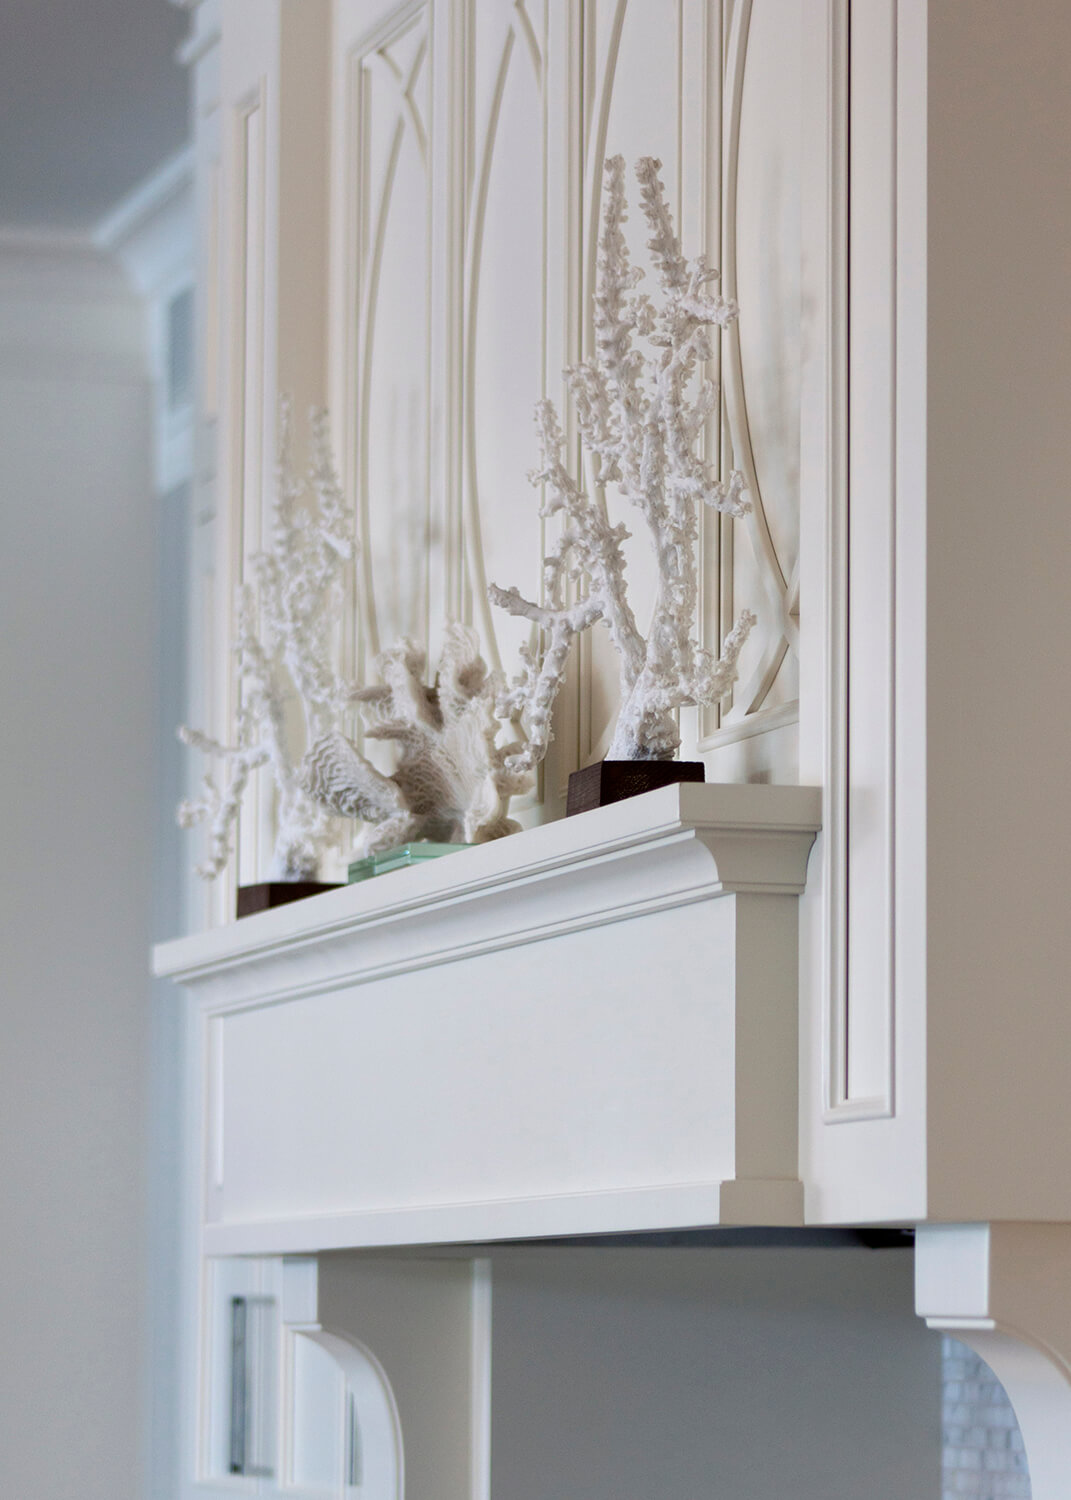 A white wood hood with a mantel shelf displaying Coastal style decor and coral.